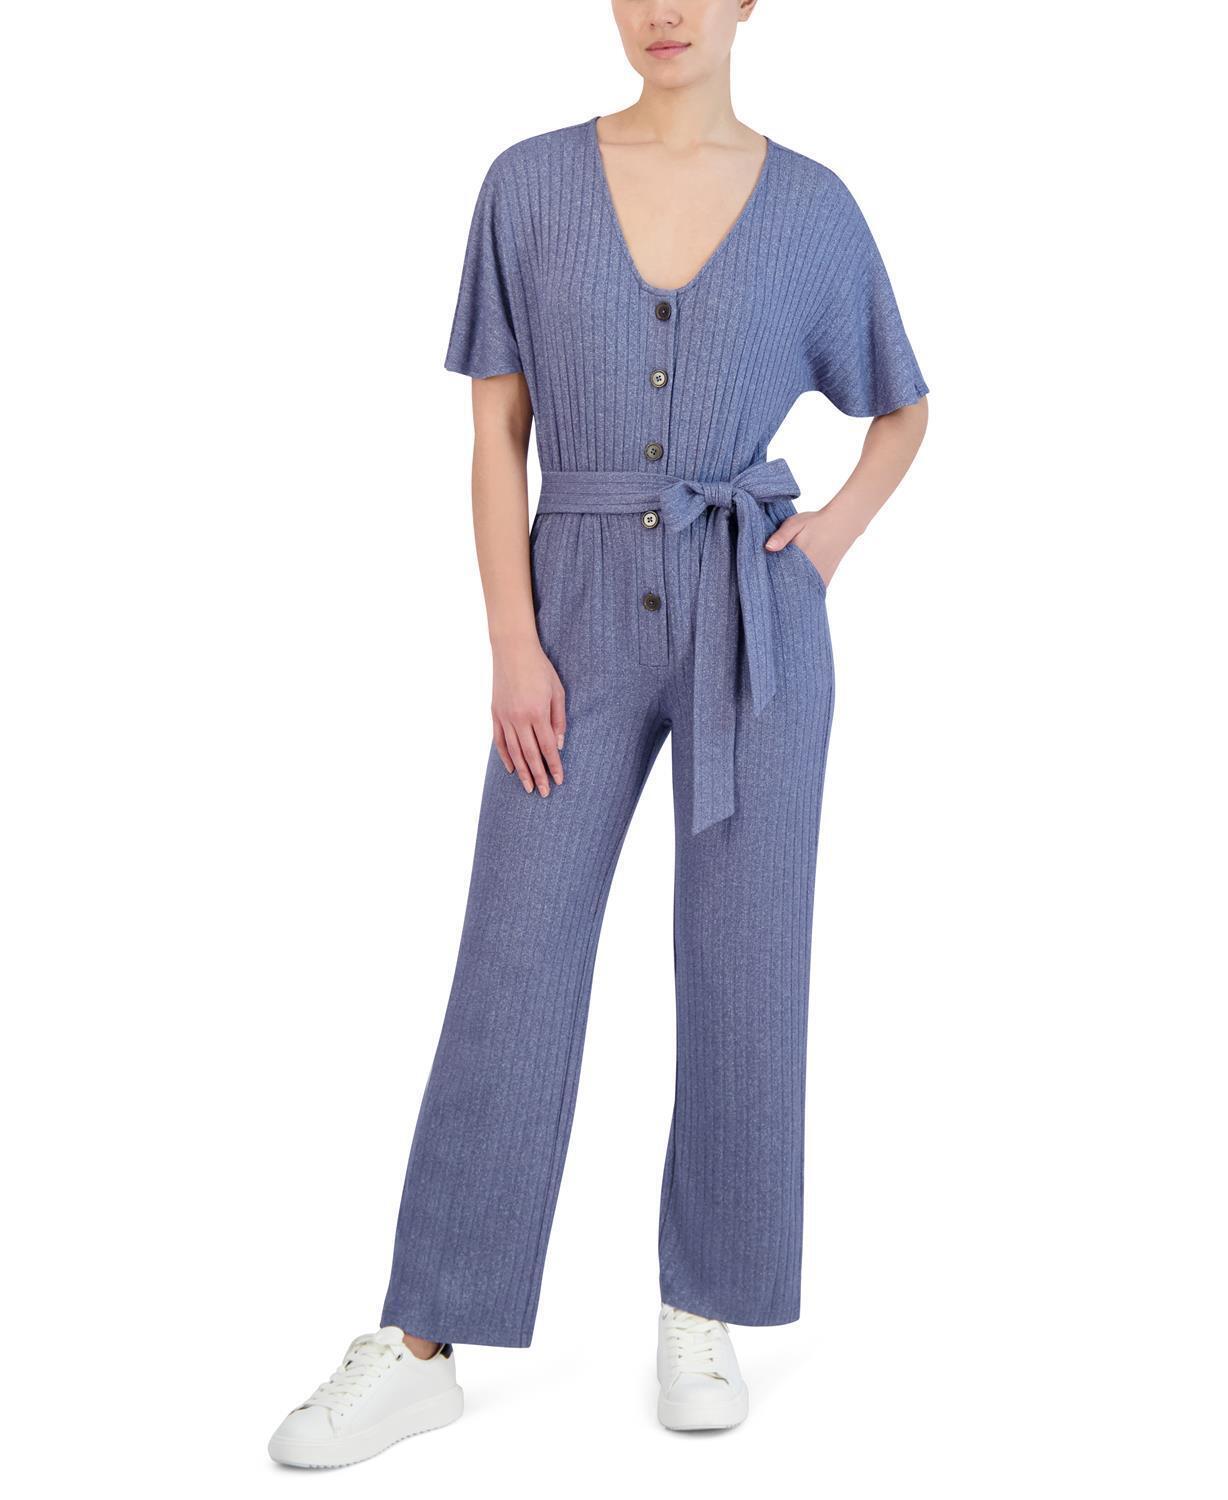 Primary image for BCBGeneration Womens Ribbed Tie-Waist Jumpsuit,Denim Blue,XX-Small